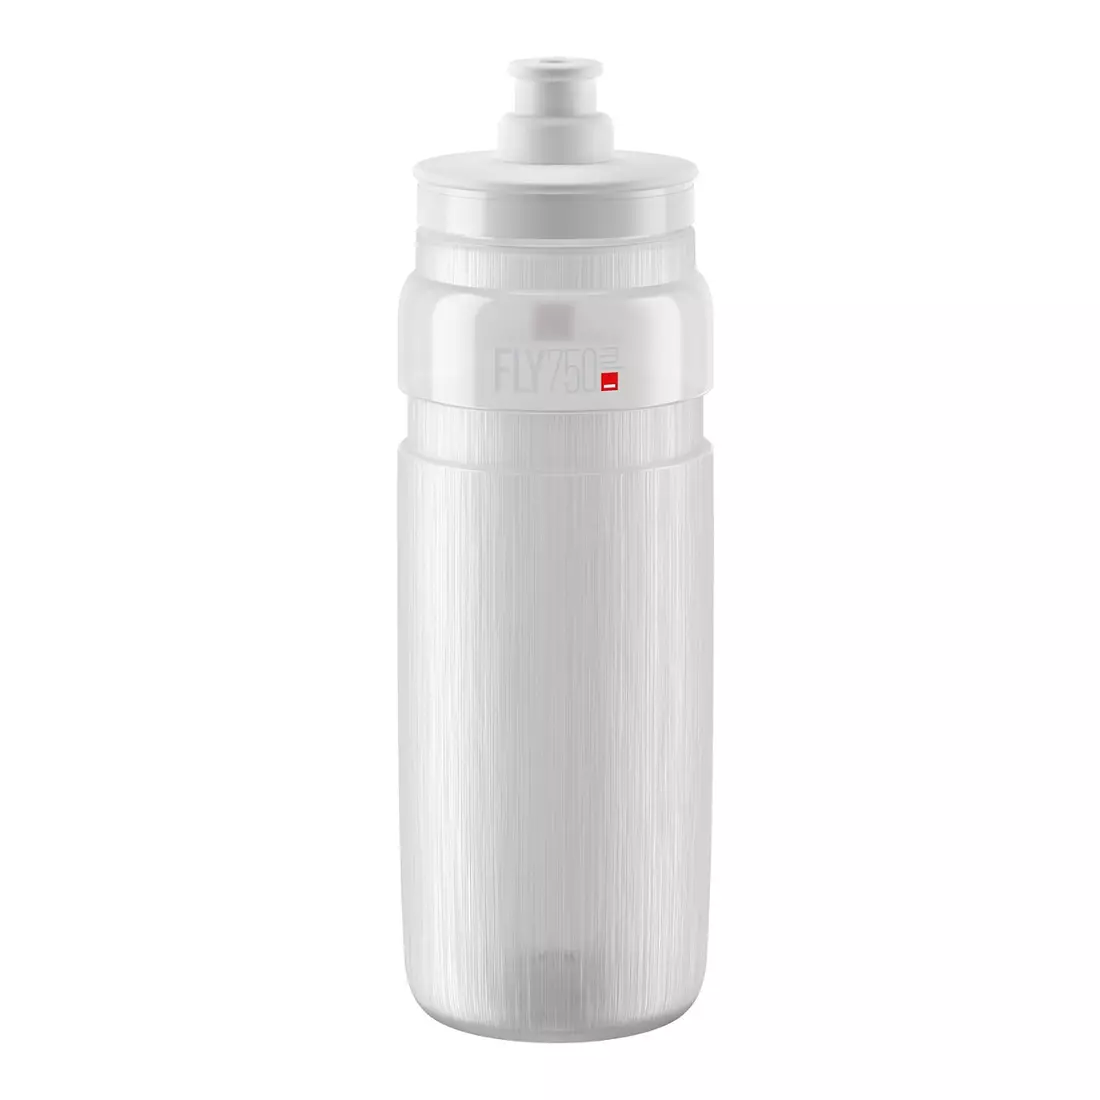 ELITE FLY TEX bicycle water bottle 750 ml, clear